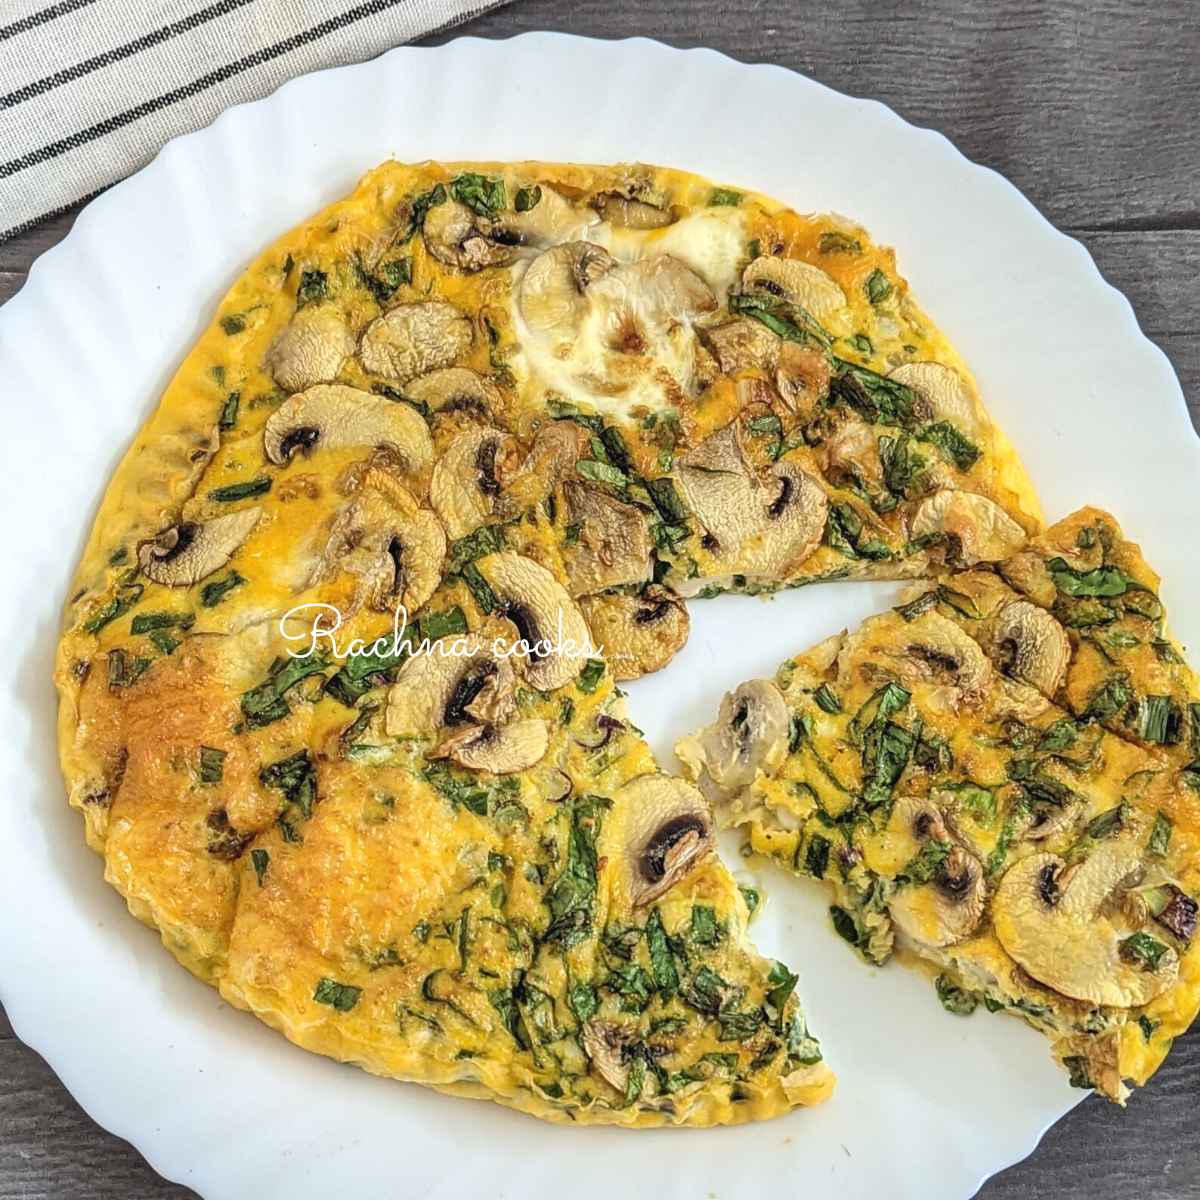 A slice of frittata cut out from the round cooked frittata served on a white plate.